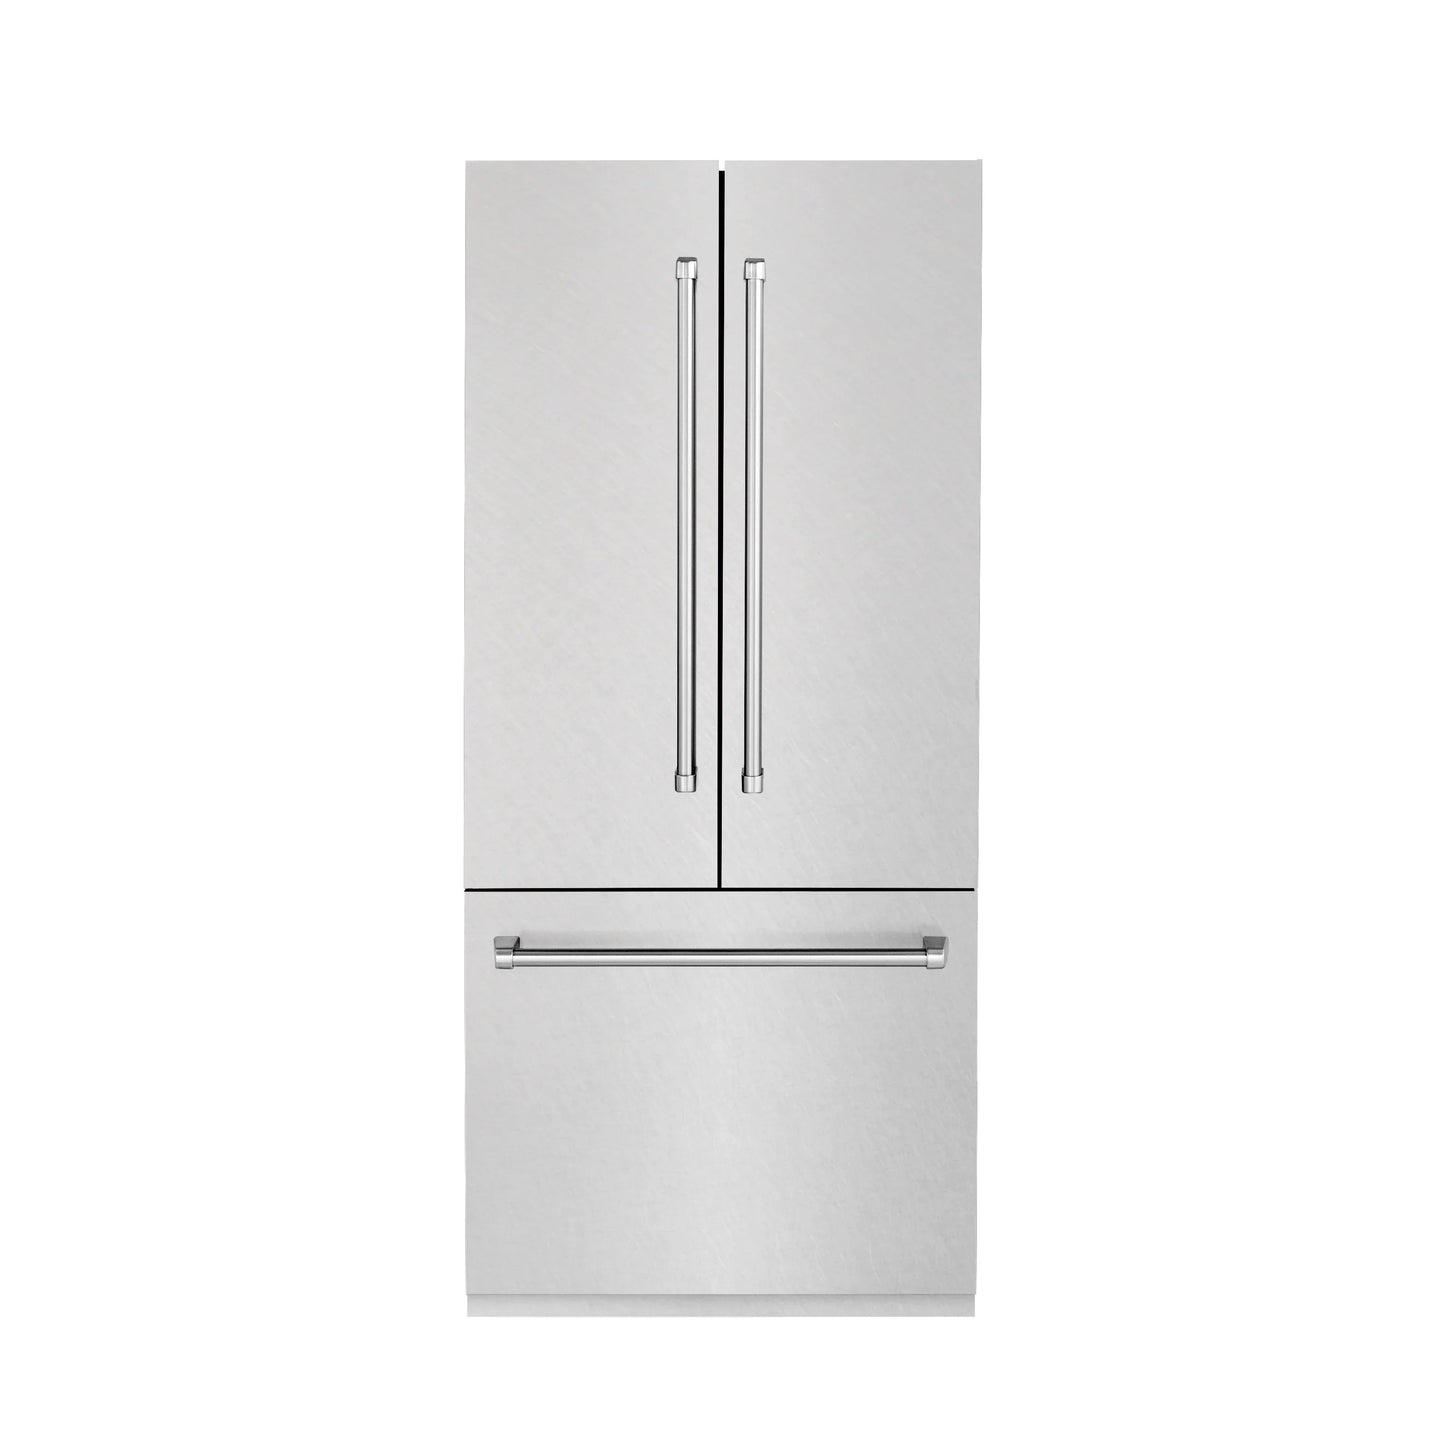 ZLINE 36" 19.6 cu. ft. Built-In Refrigerator with Internal Water and Ice Dispenser in Fingerprint Resistant Stainless Steel, RBIV-SN-36